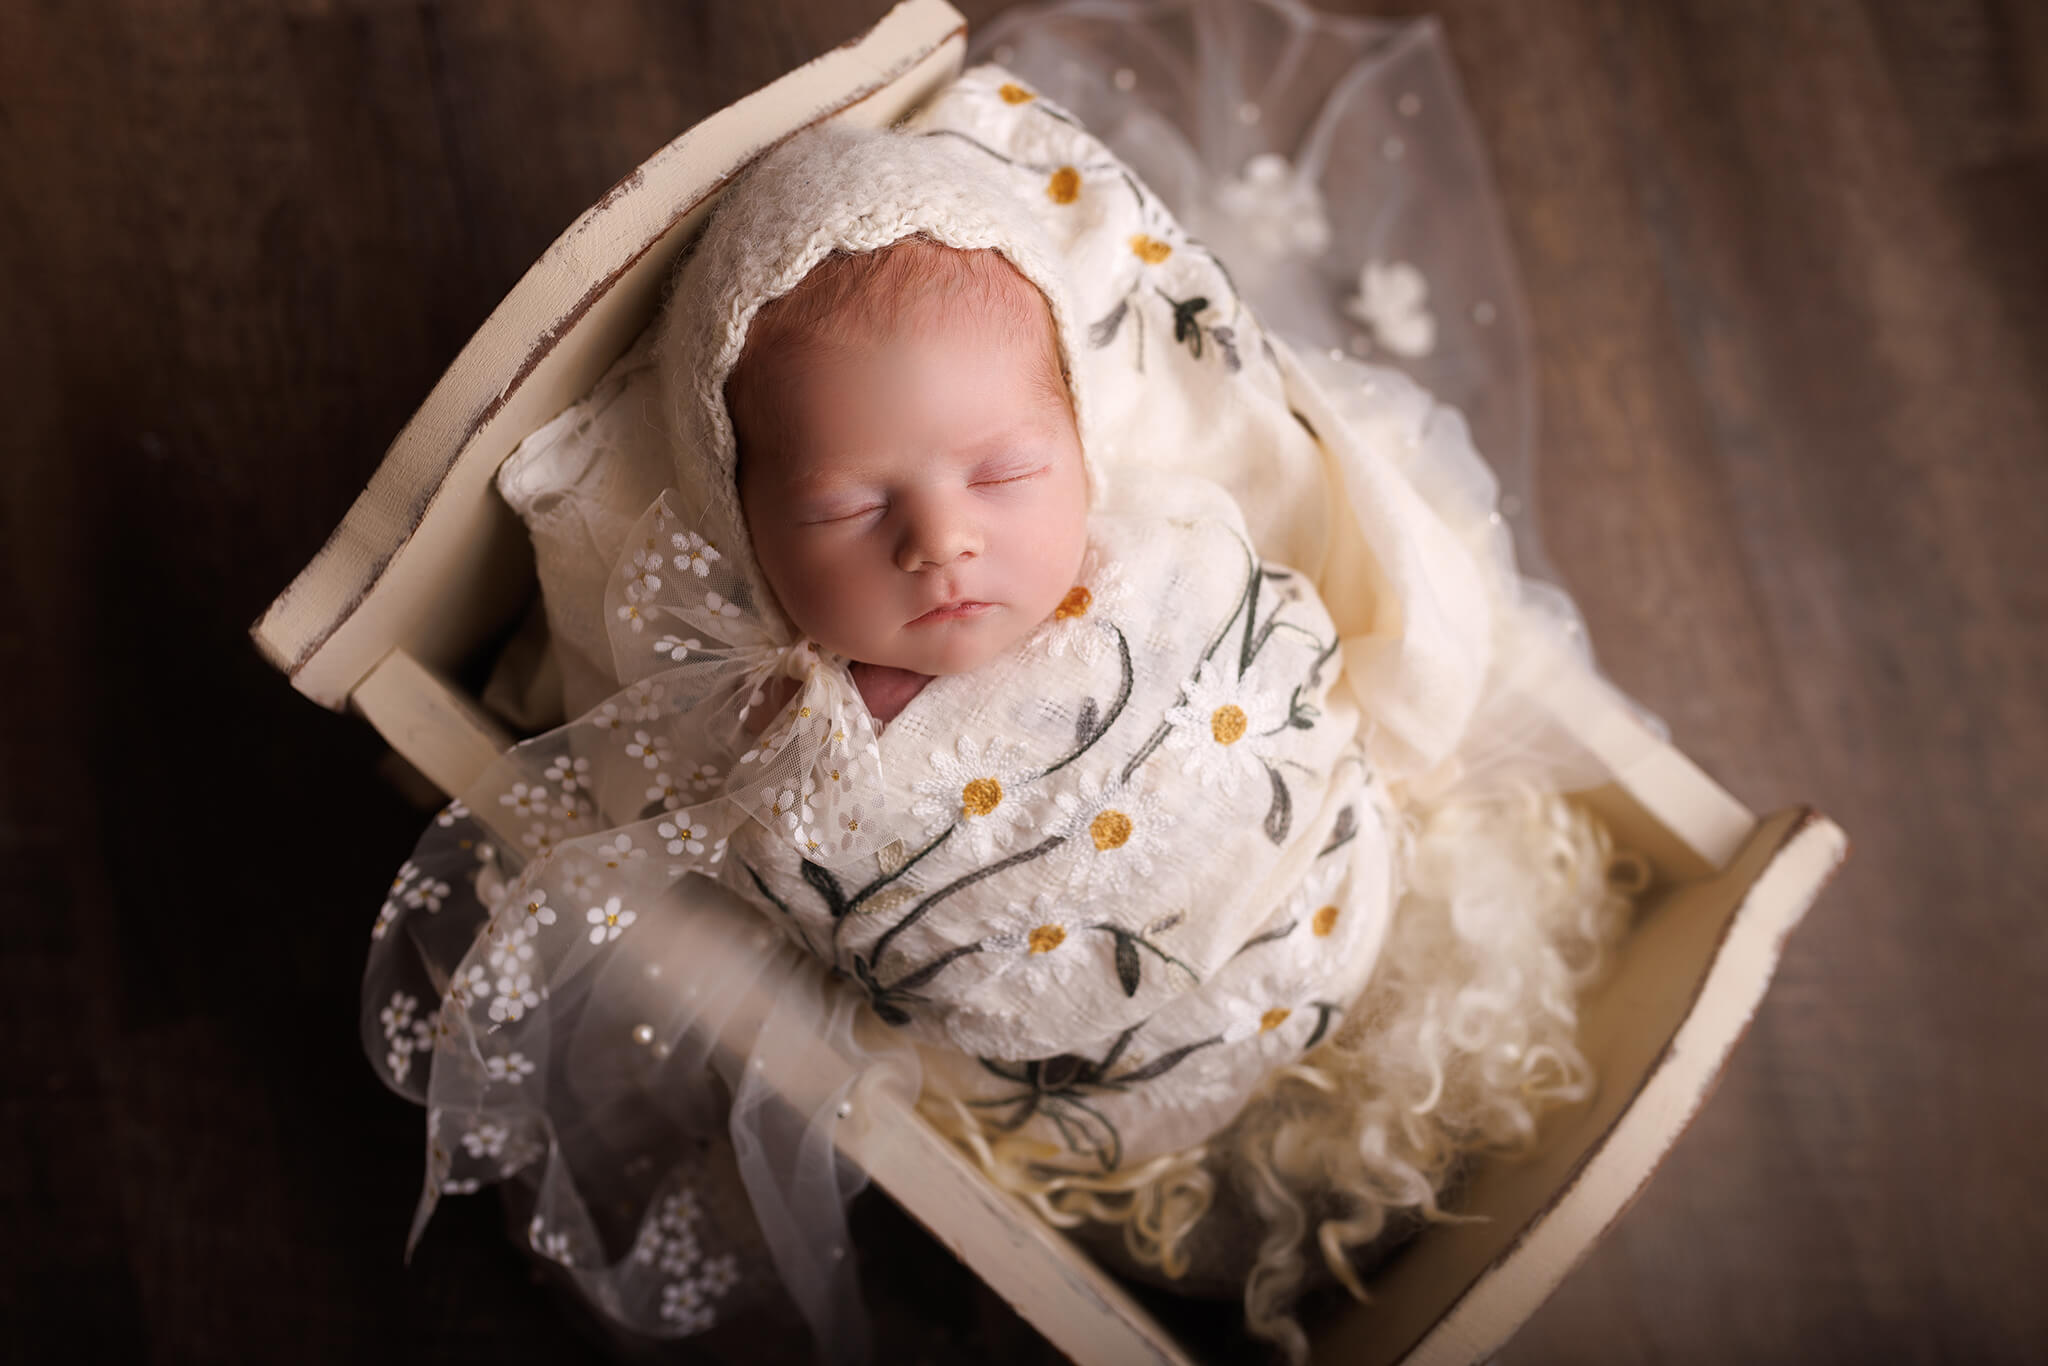 A newborn baby sleeps wrapped in a daisy blanket in a wooden crib and white bonnet